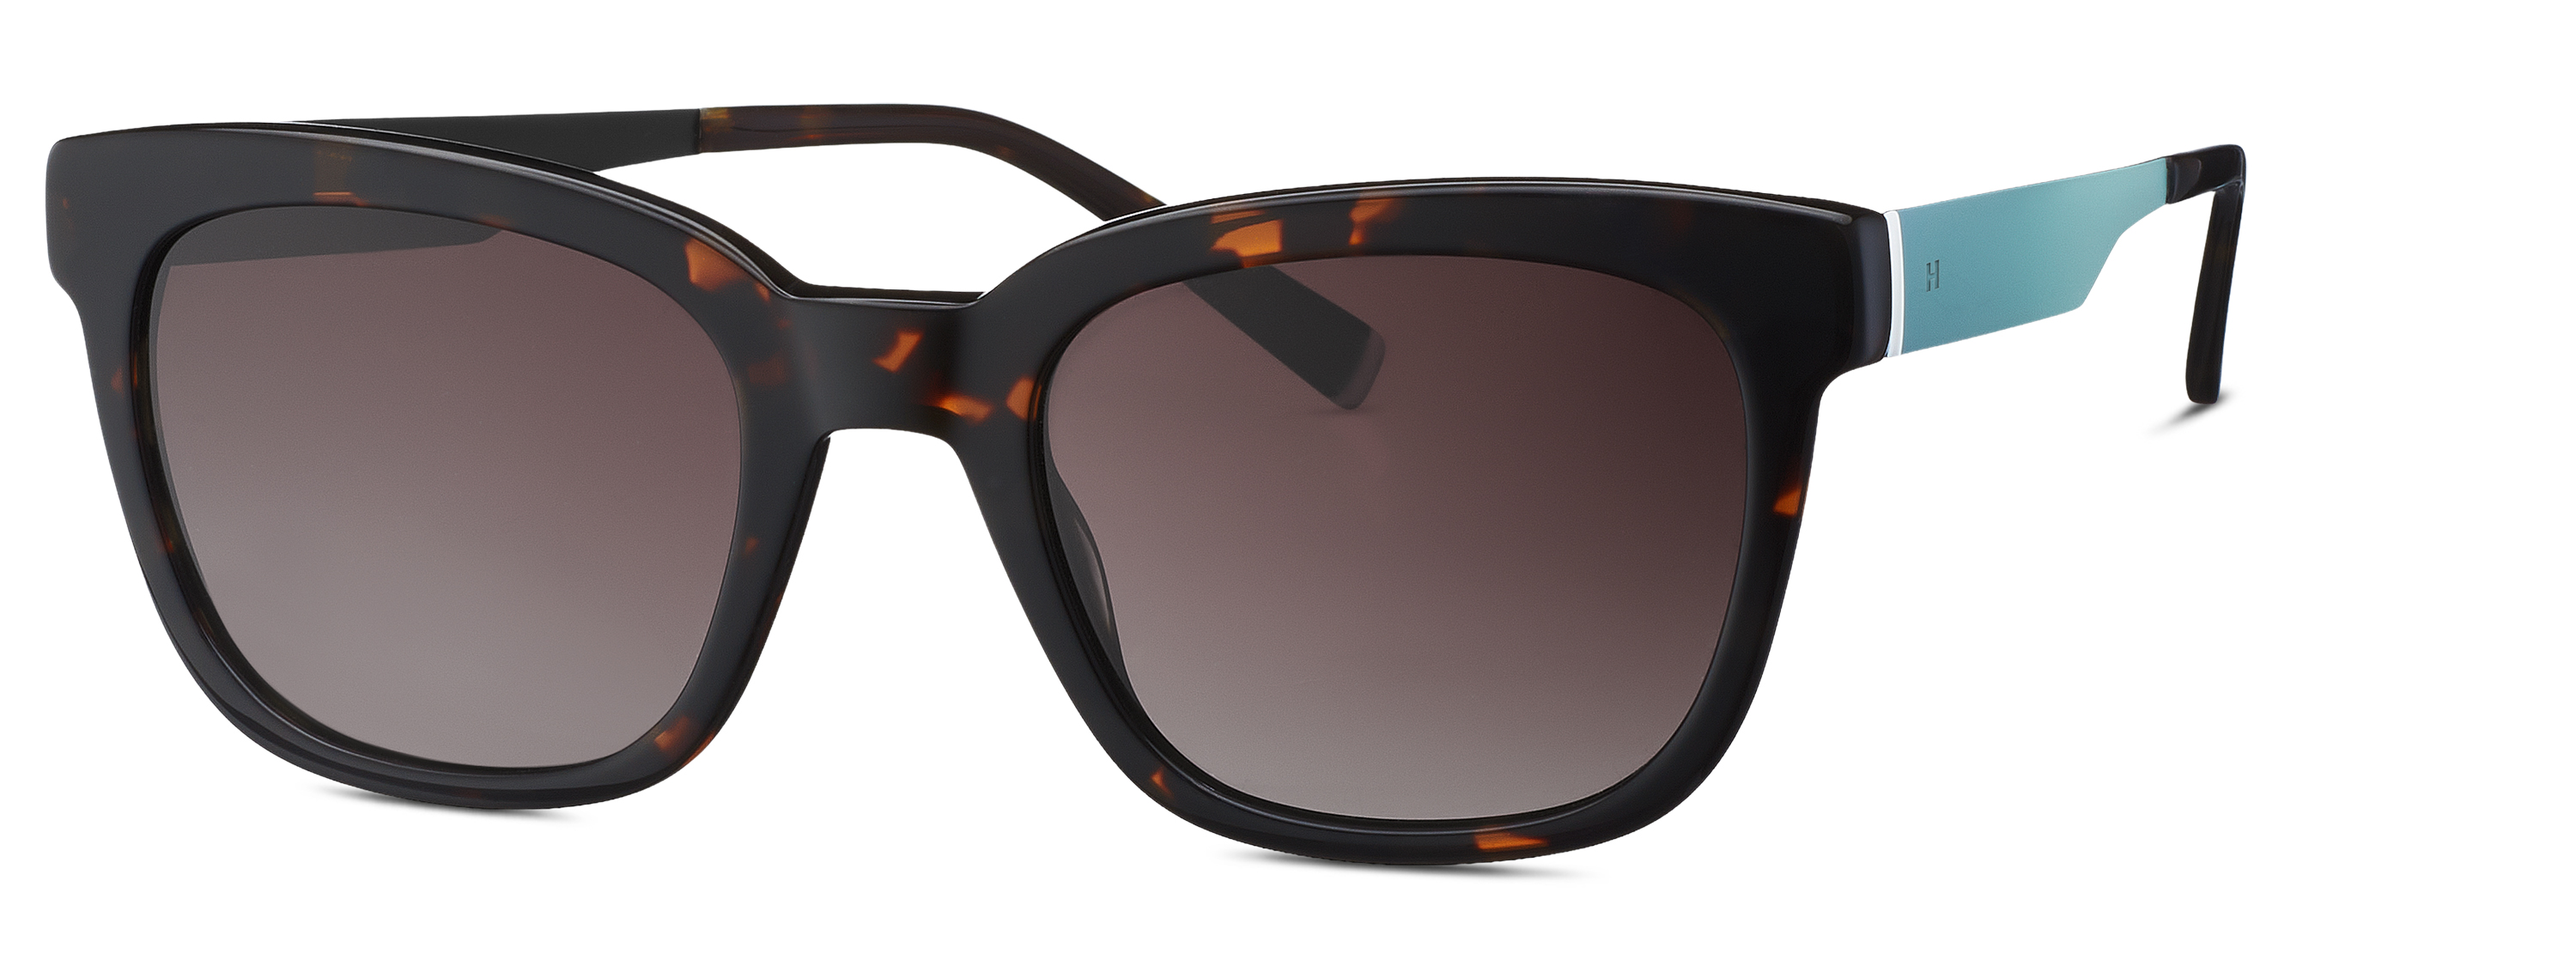 [products.image.front] HUMPHREY´S eyewear 585340 60 Sonnenbrille